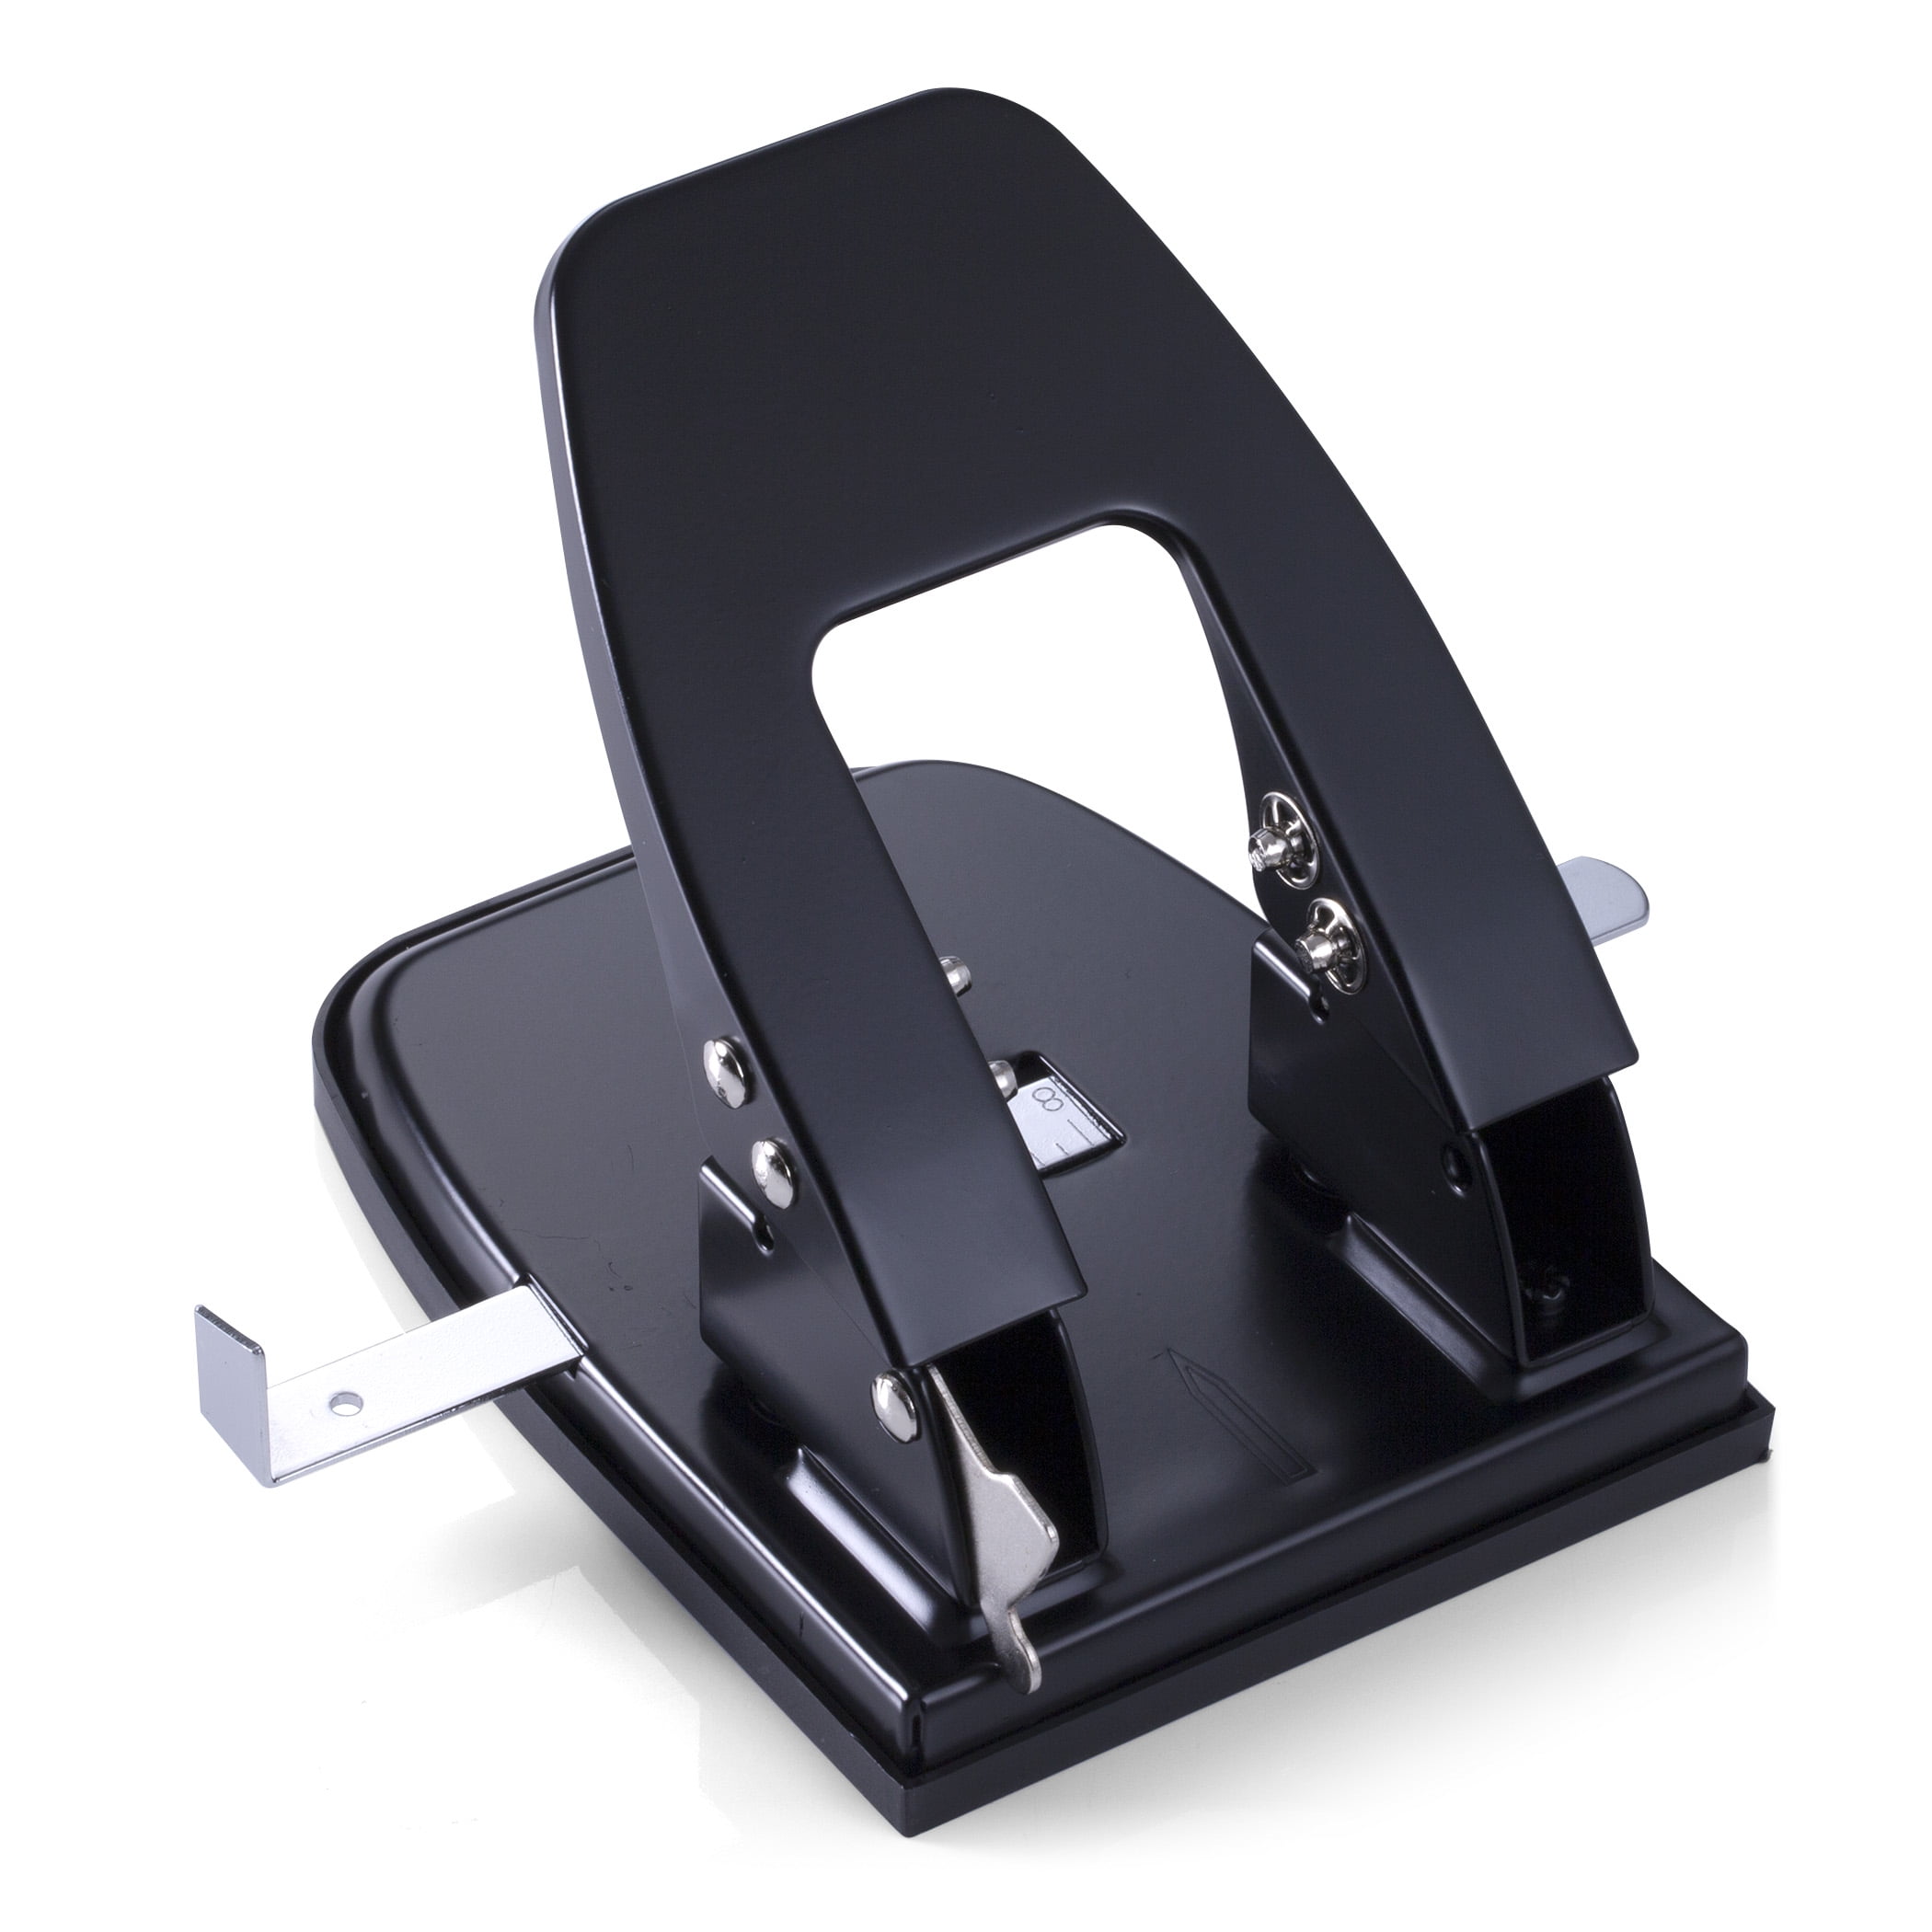 2 Hole Puncher Round Hole Puncher Stationery 20 Sheets Capacity  Skid-Resistant Base Manual Punching for Paper Chipboard